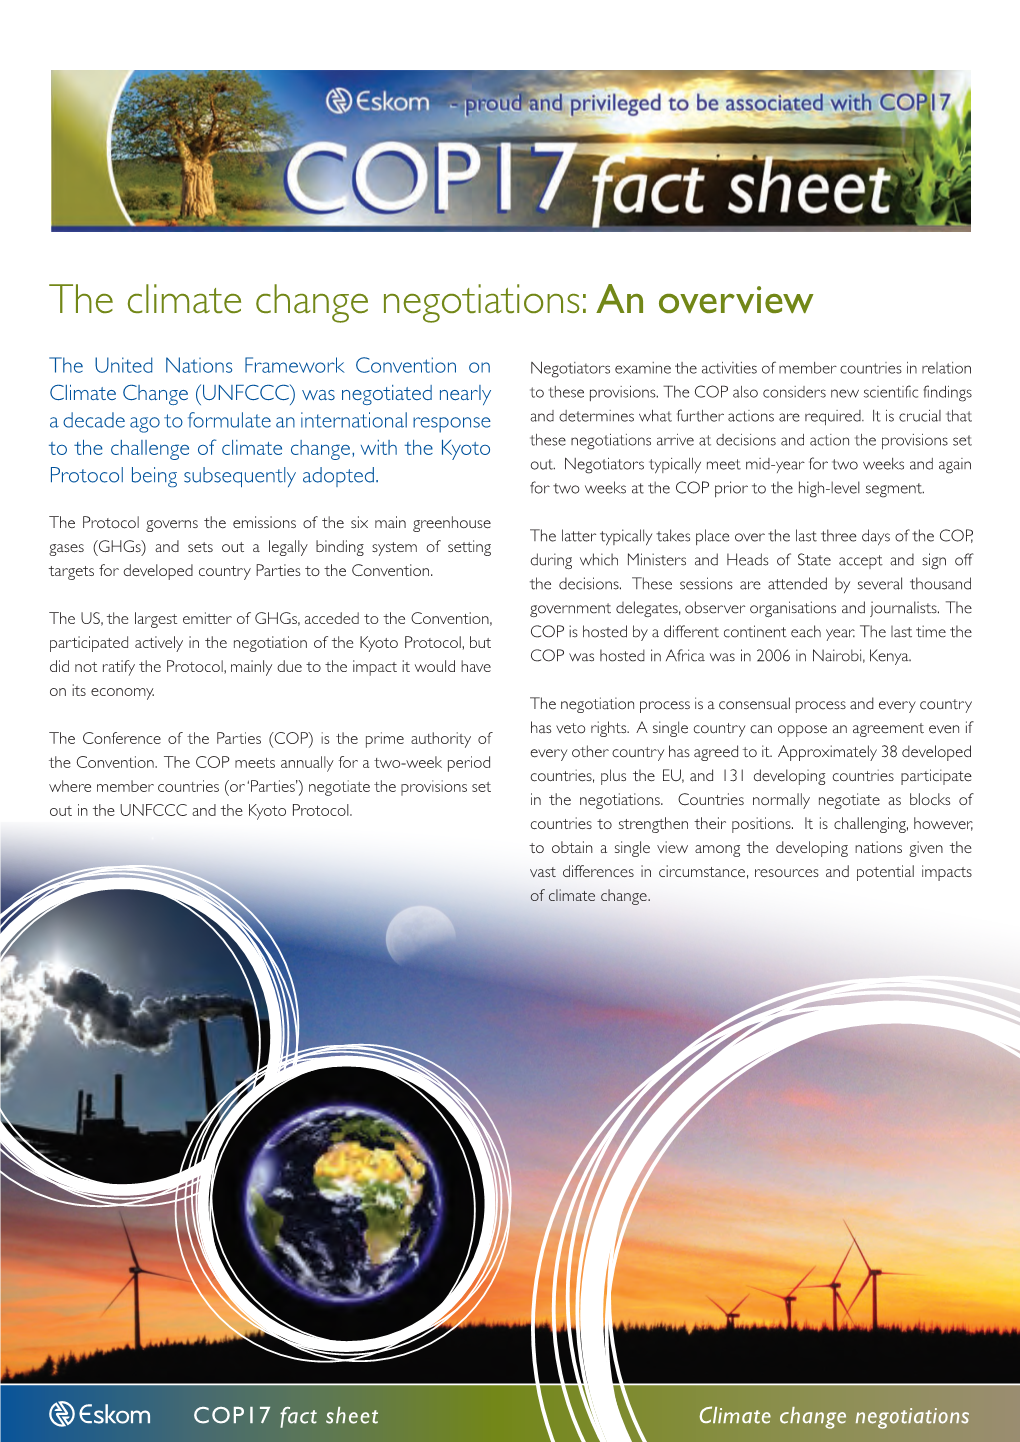 The Climate Change Negotiations: an Overview